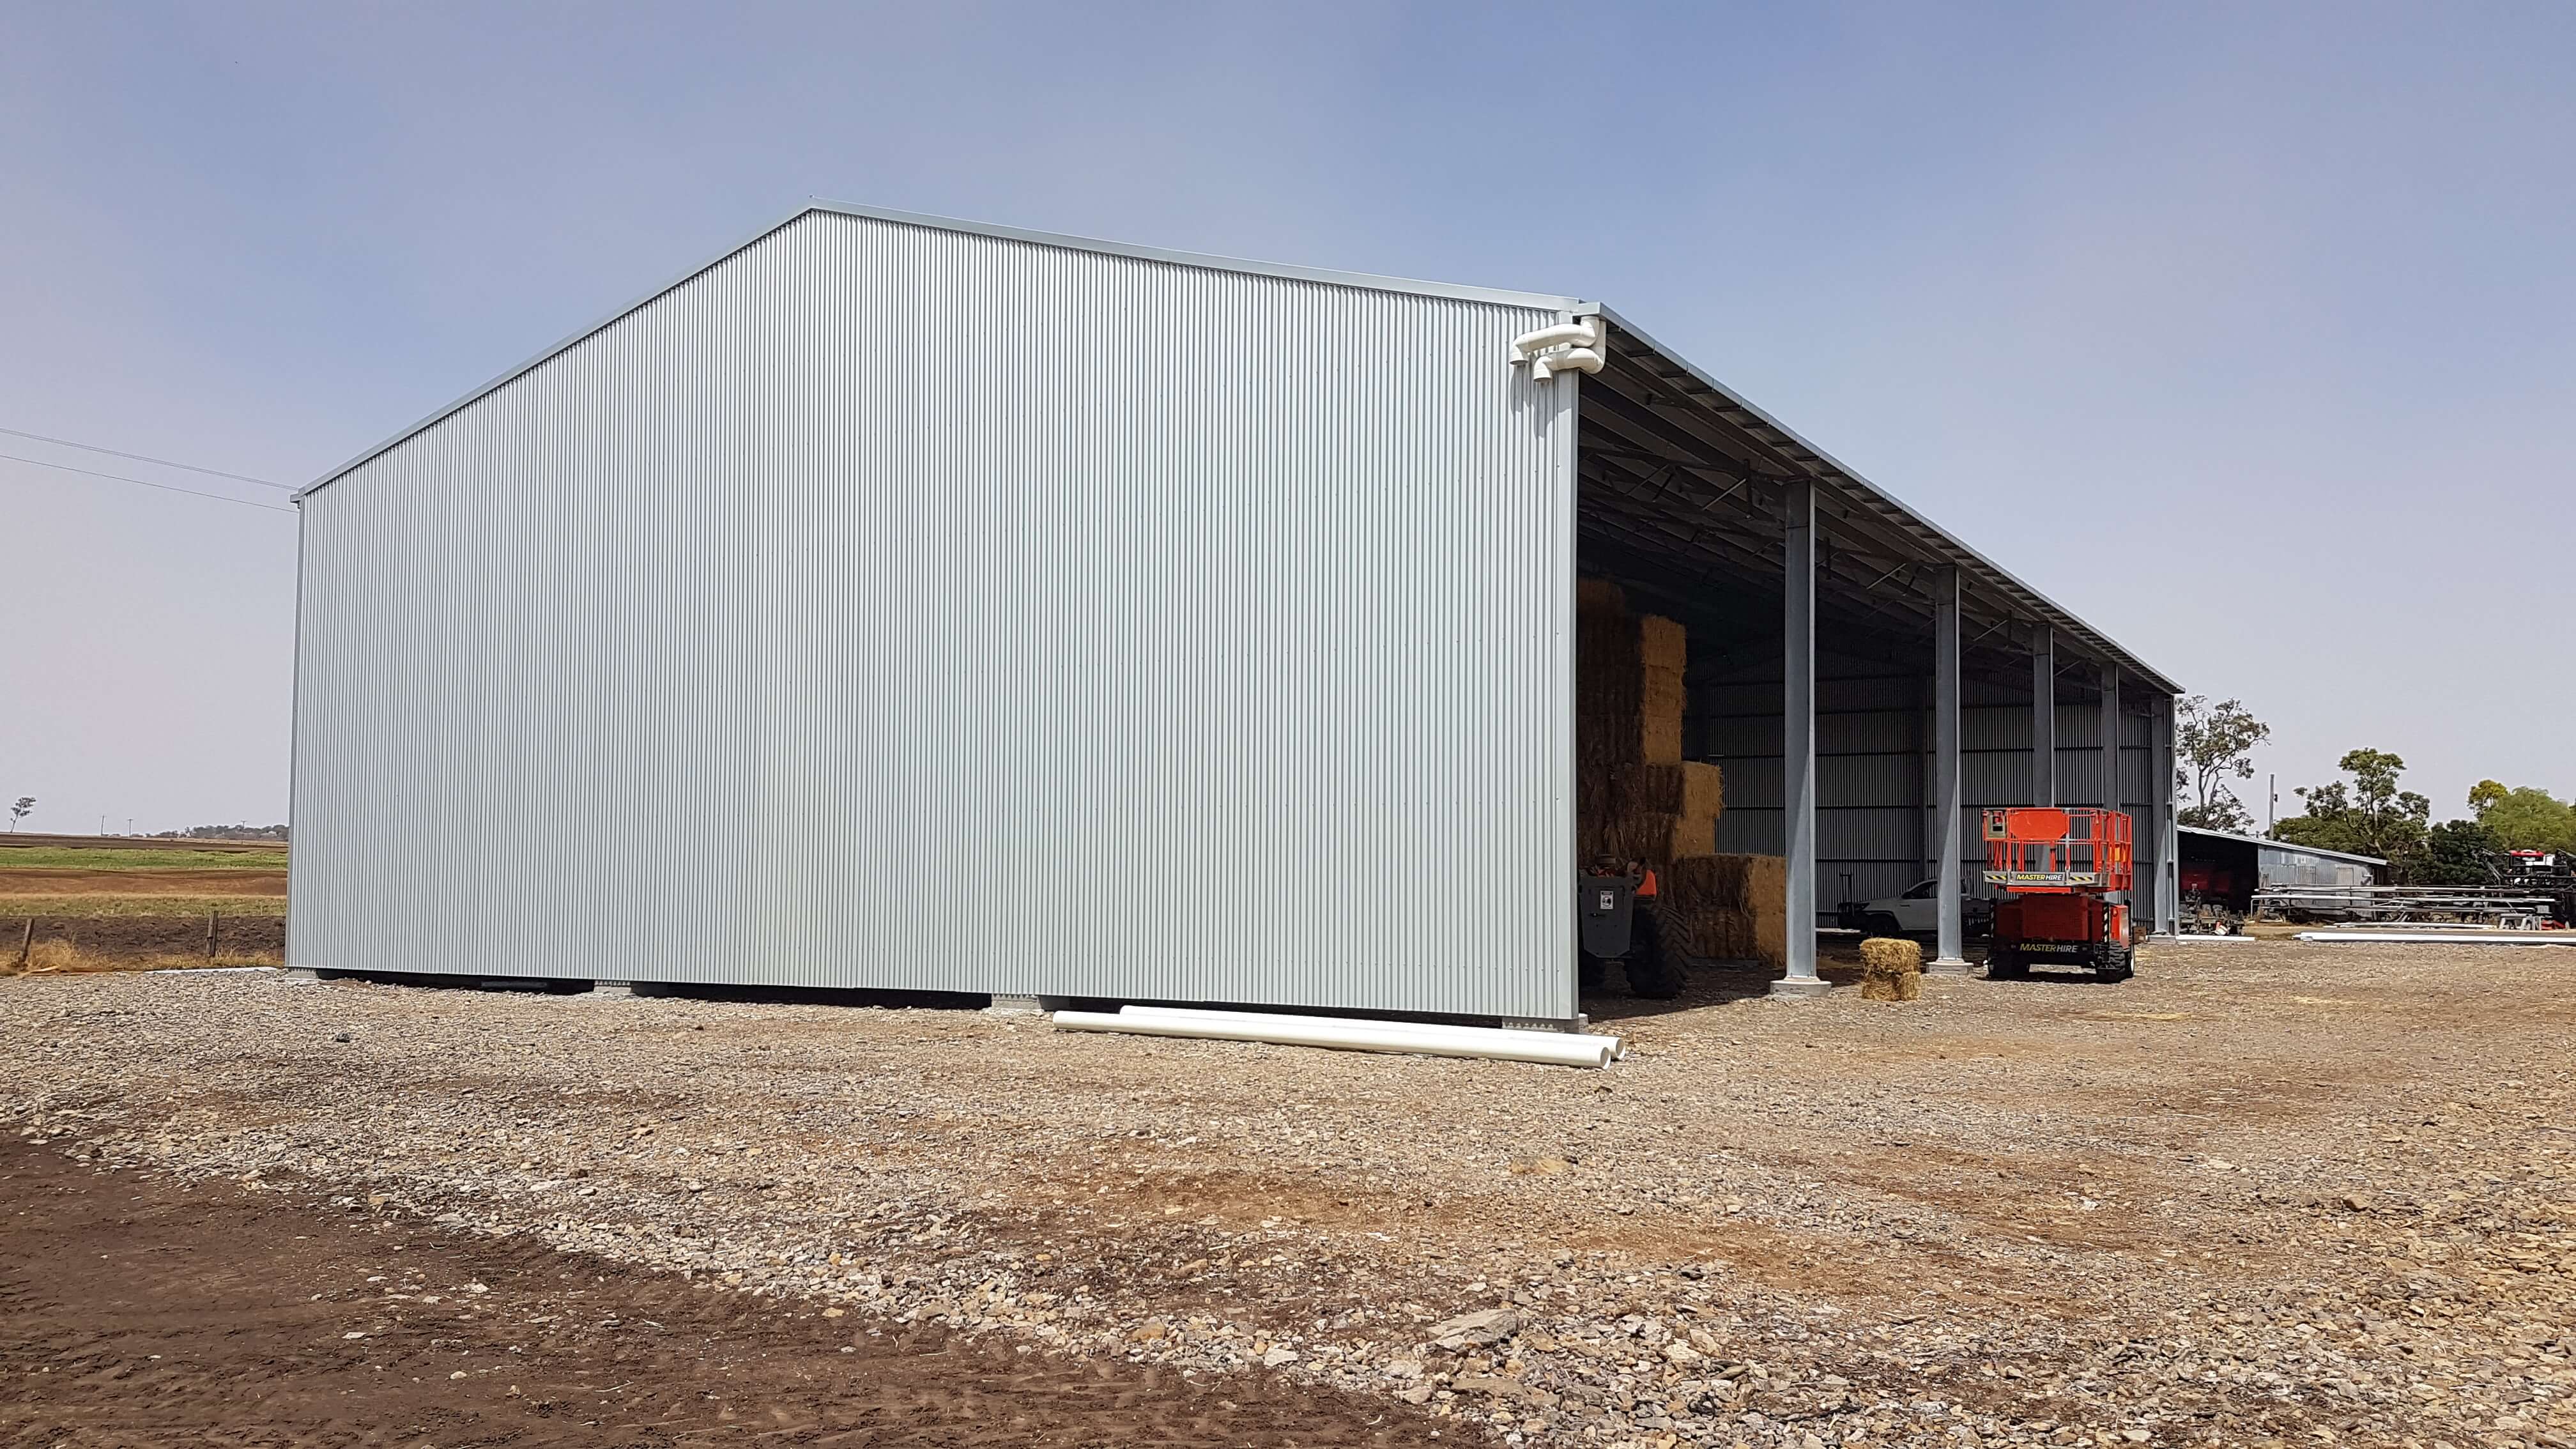 Structural steel farm shed built in Nobby QLD